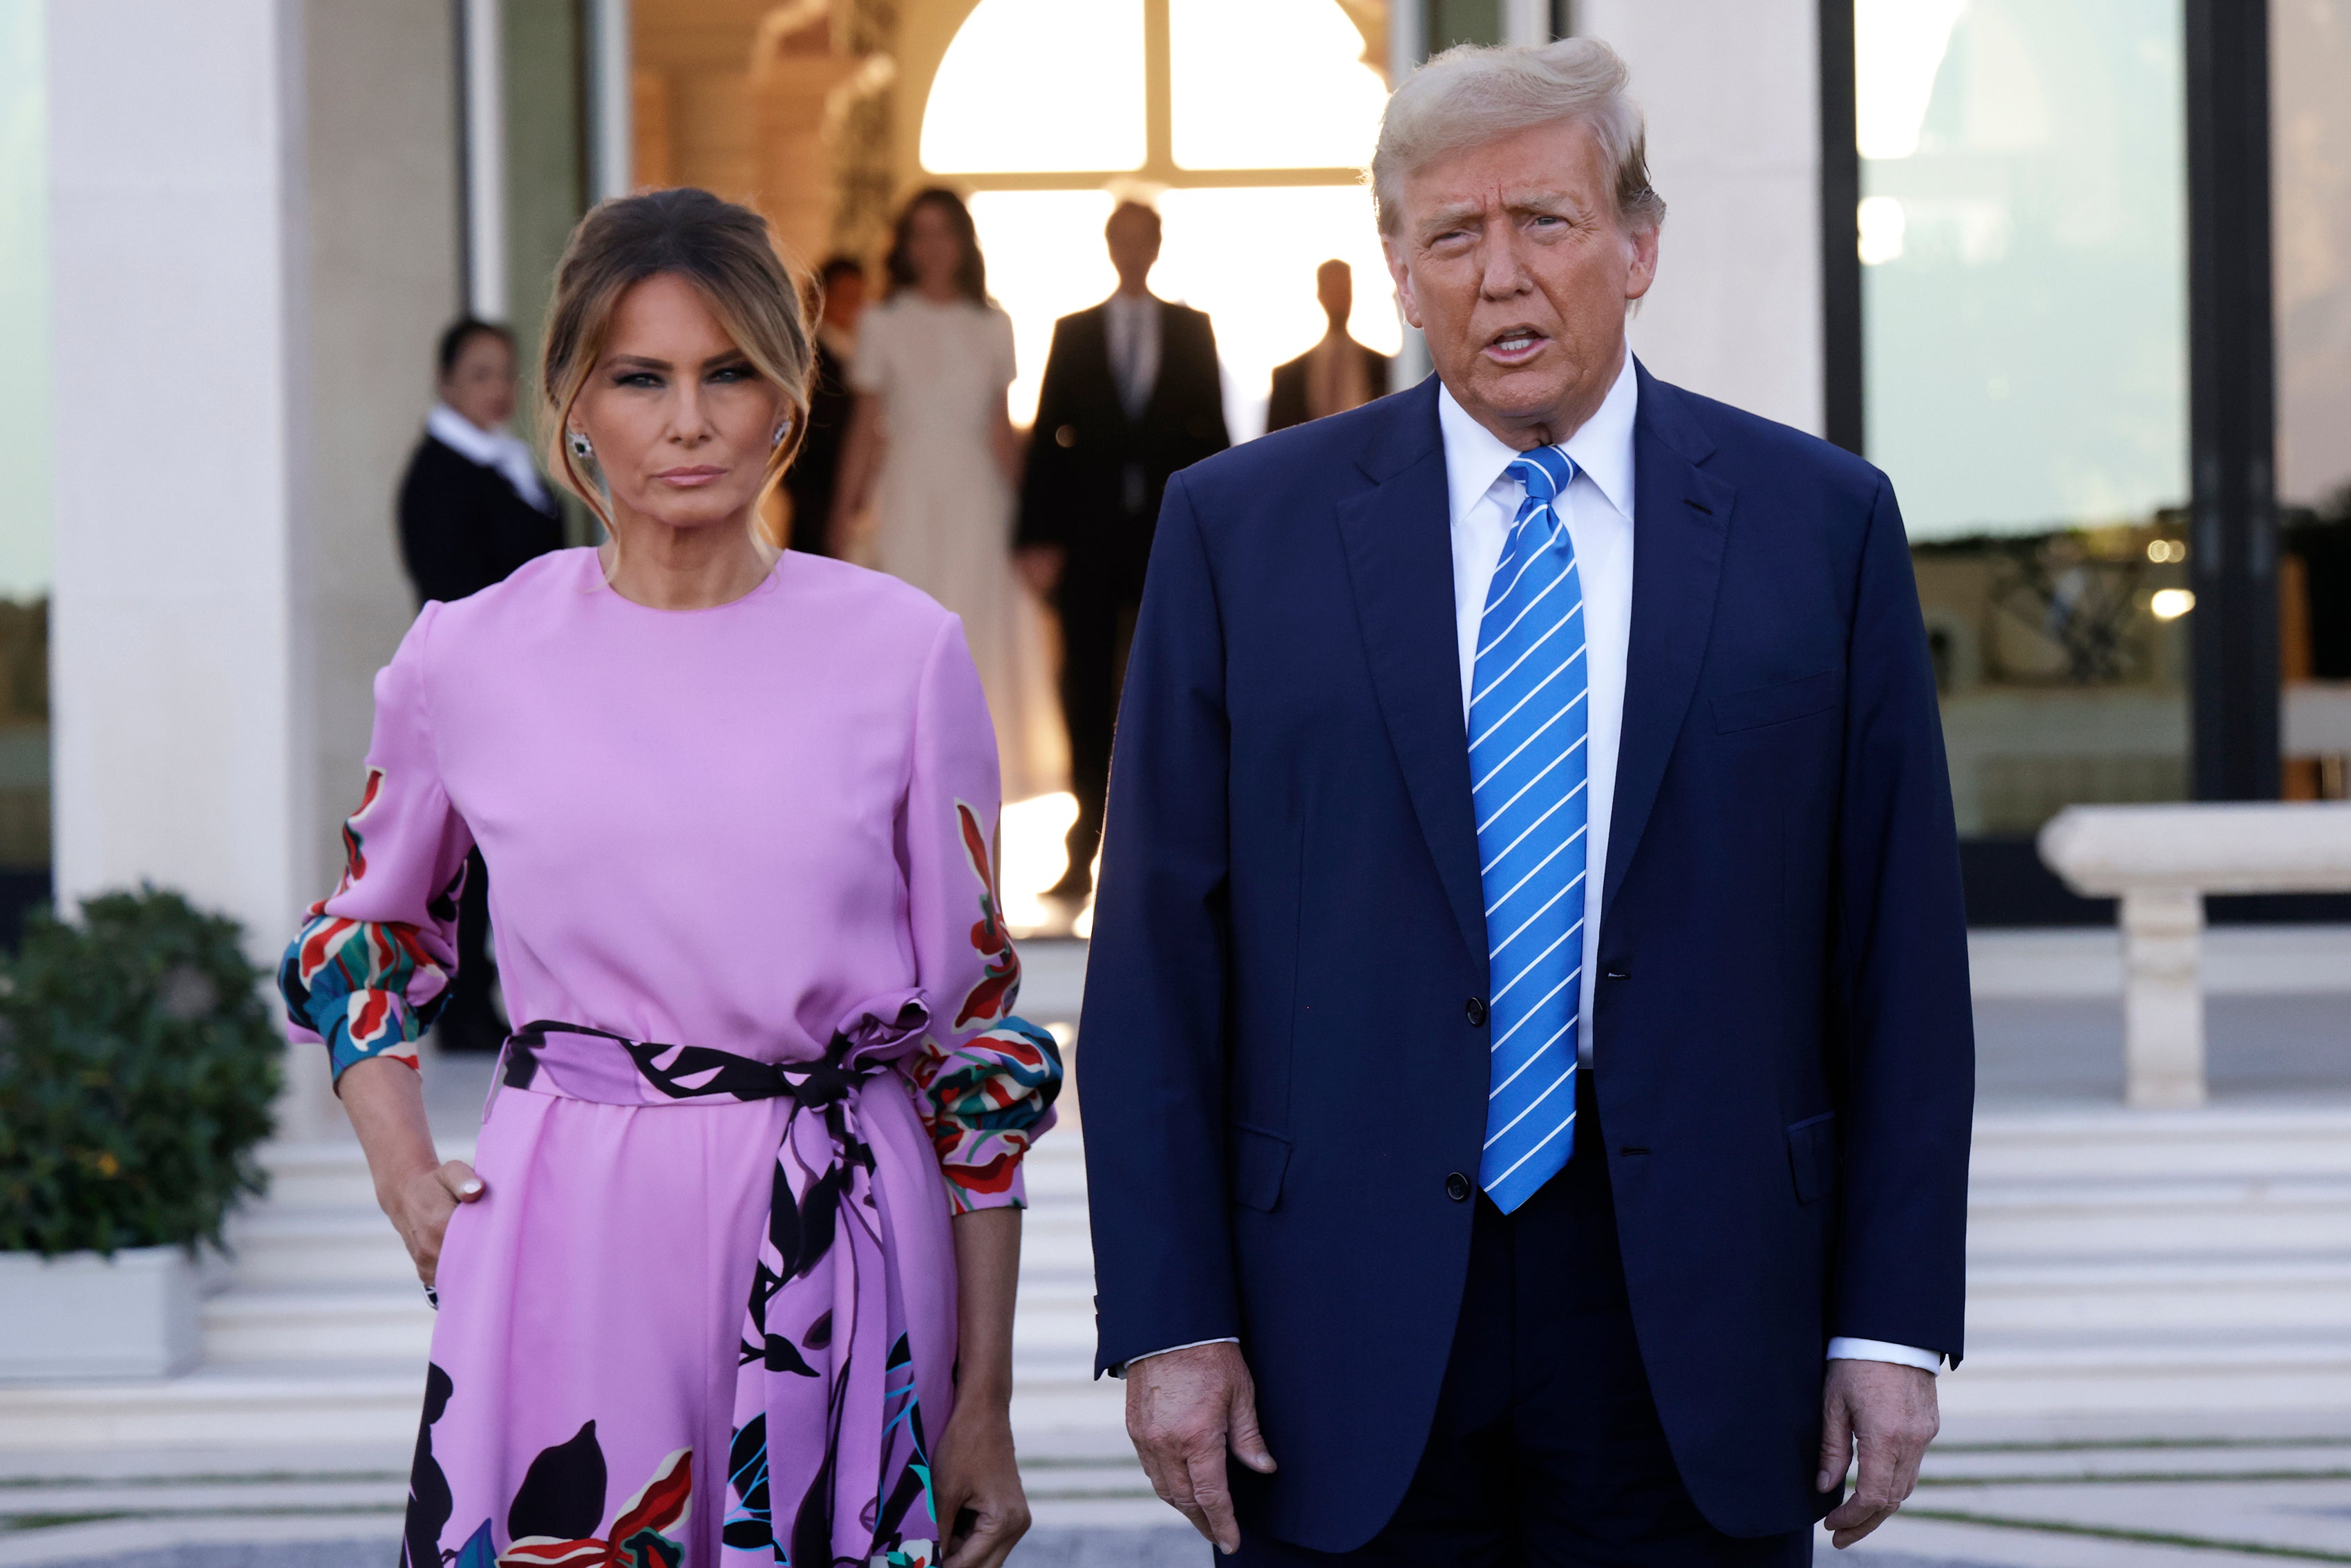 Republican presidential candidate, former US President Donald Trump, arrives at the home of billionaire investor John Paulson, with former first lady Melania Trump, on April 6, 2024 in Palm Beach, Florida